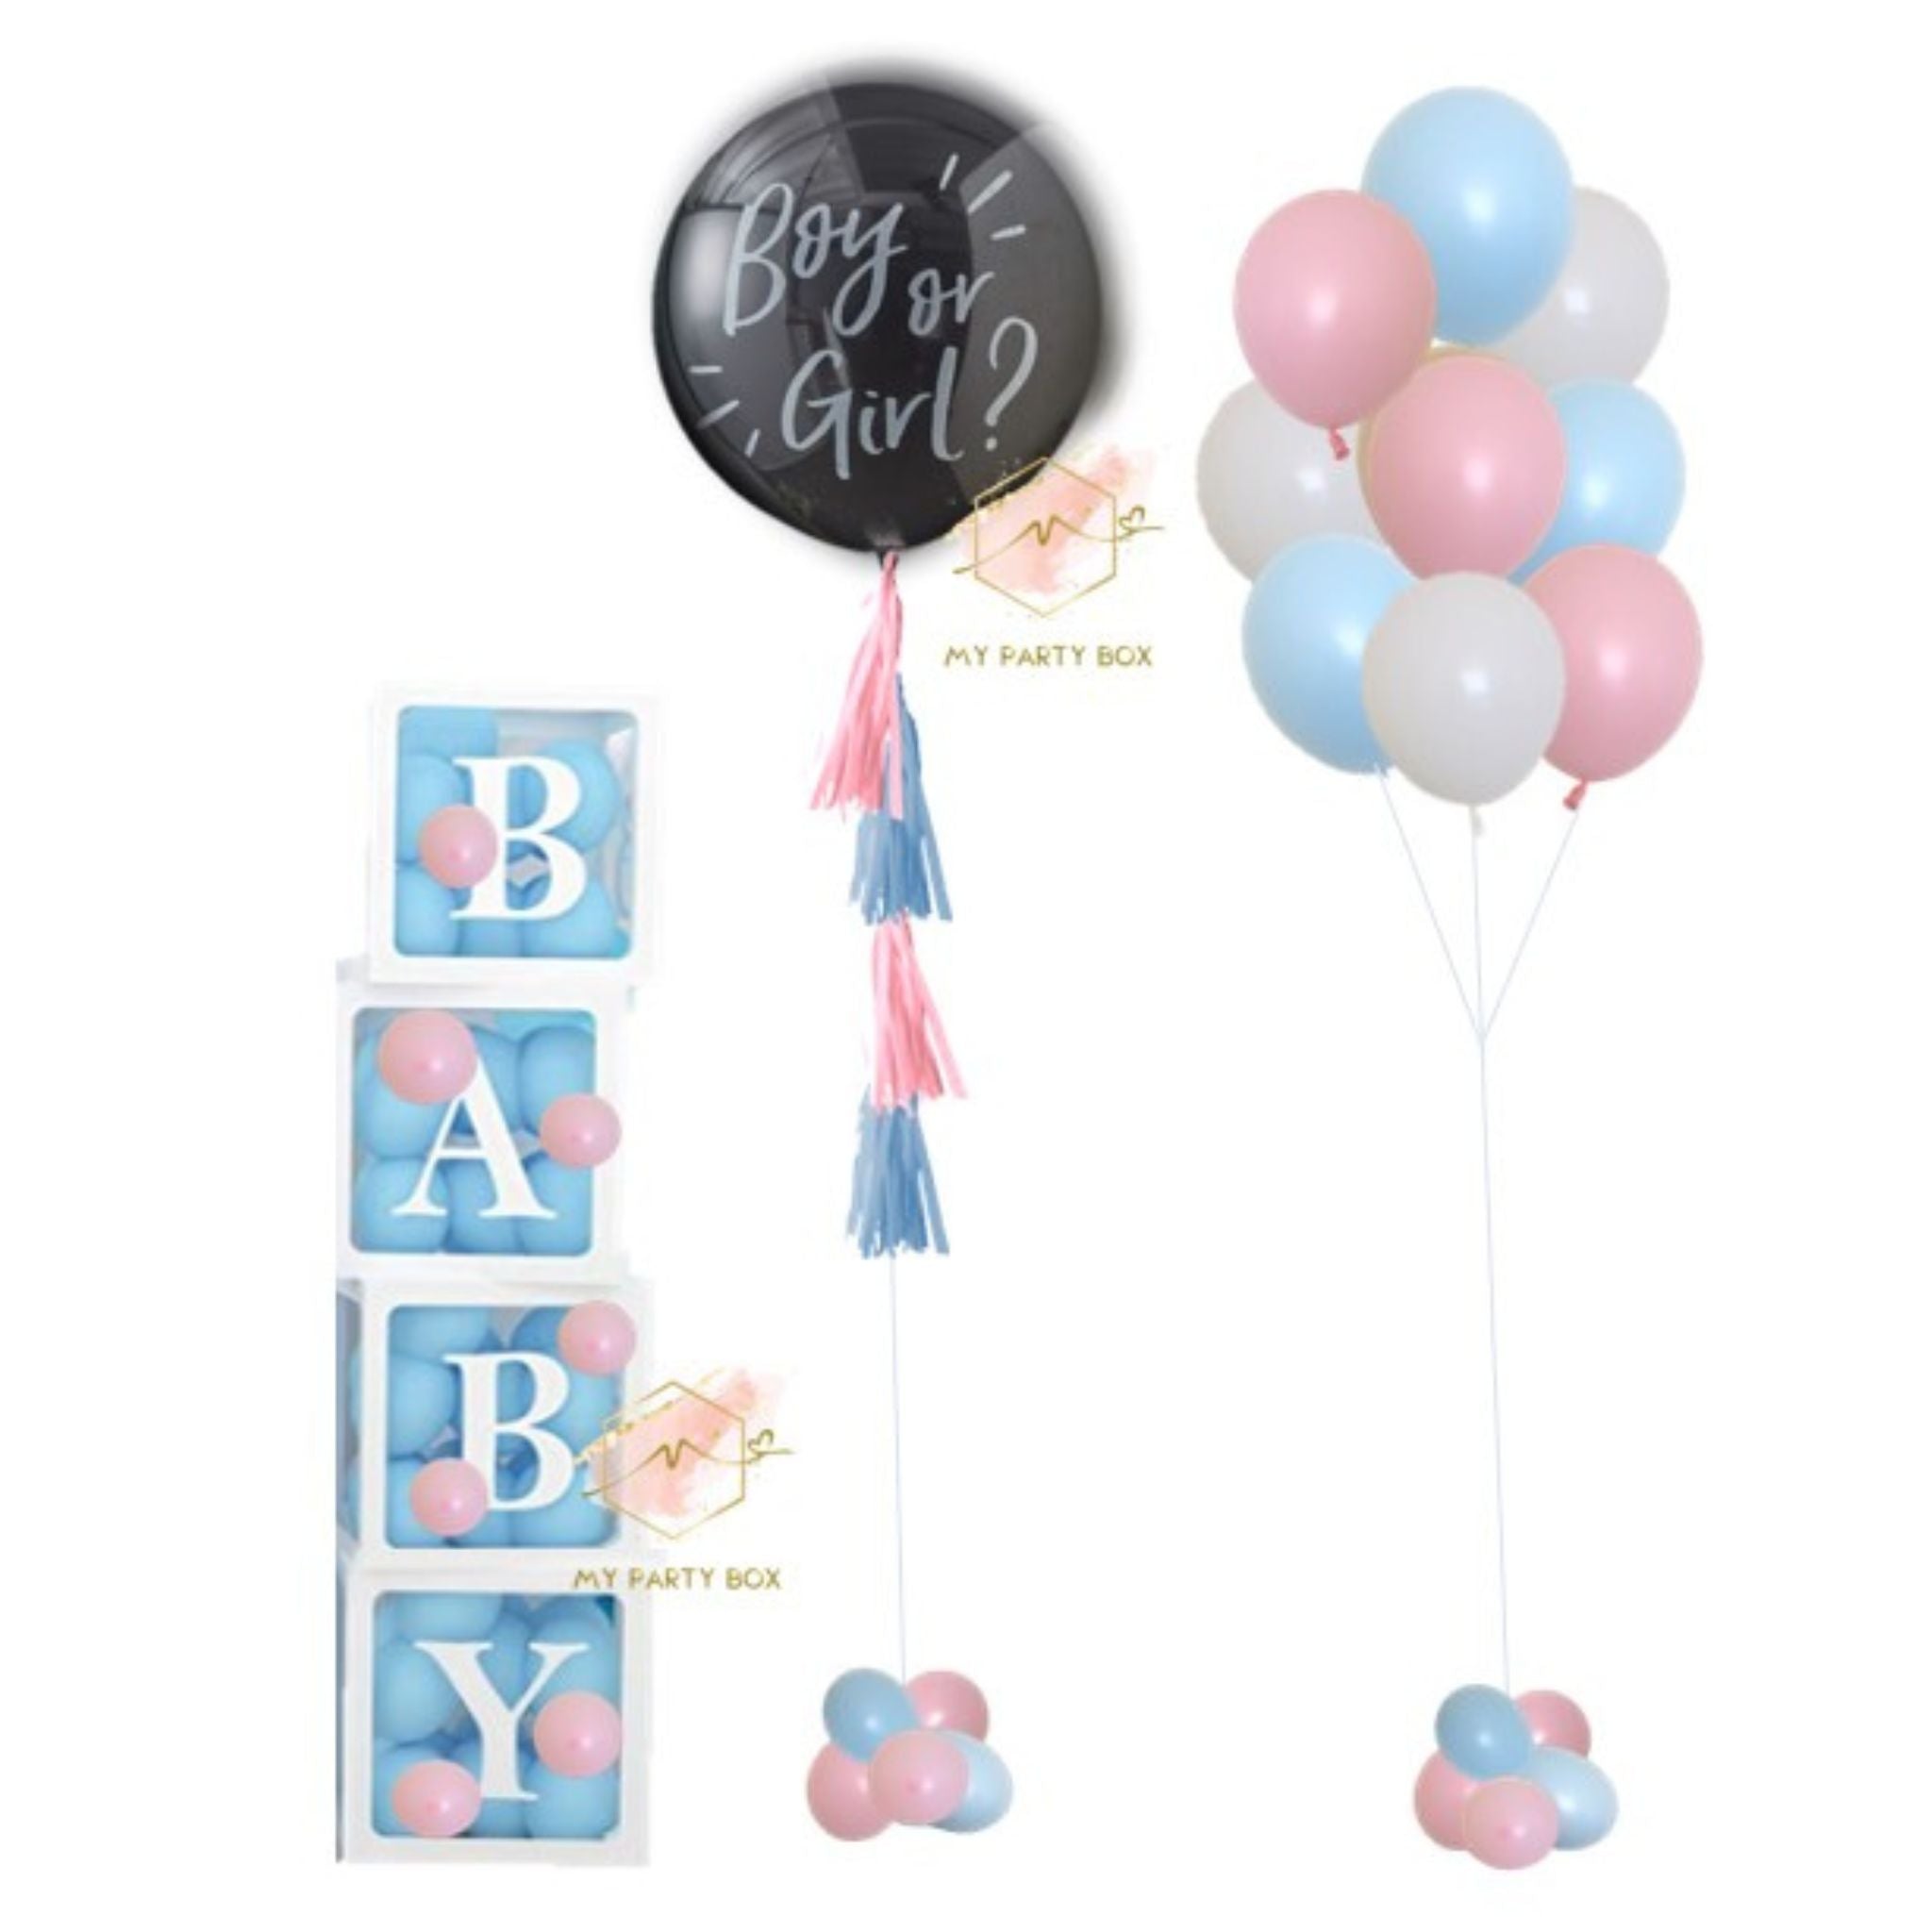 Boy or Girl Gender Reveal Combo with Baby Alphabet Box Boy Or Girl Black gender Reveal Latex Balloon with tassels and 9 Latex Balloons bouquets